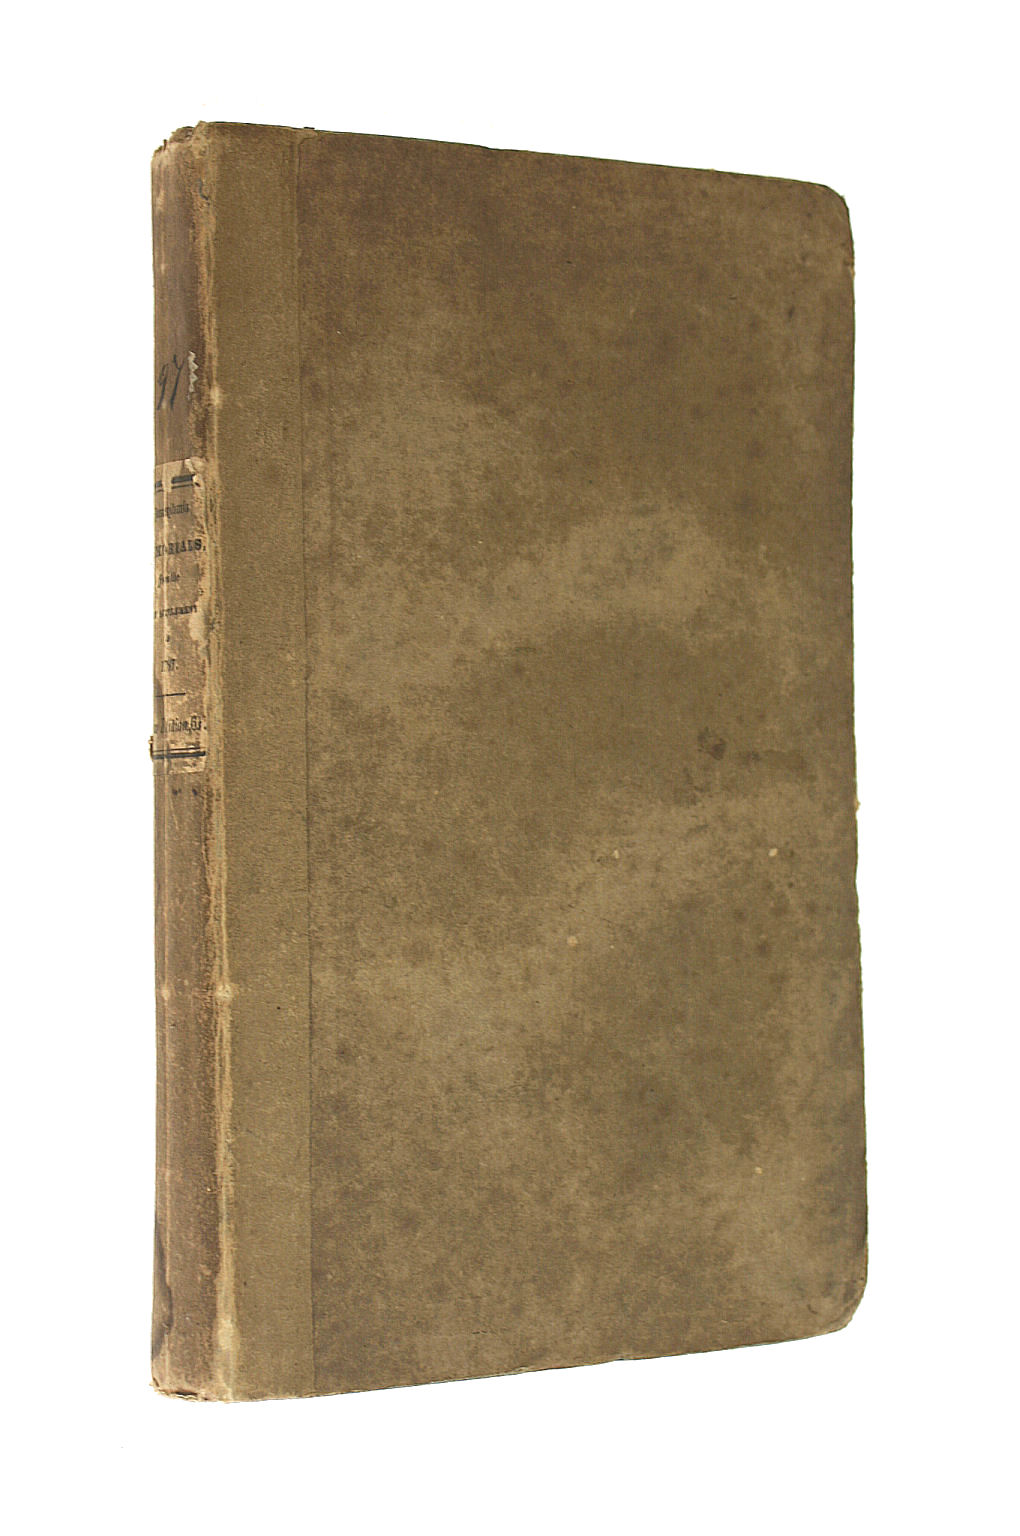 W. ALEXANDER, HARVEY AND DARTON - A Collection Of Memorials Concerning Divers Deceased Ministers And Others Of The People Called Quakers, In Pennsylvania, New-Jersey, And Parts Adjacent, From Nearly The First Settlement, To The Year 1787